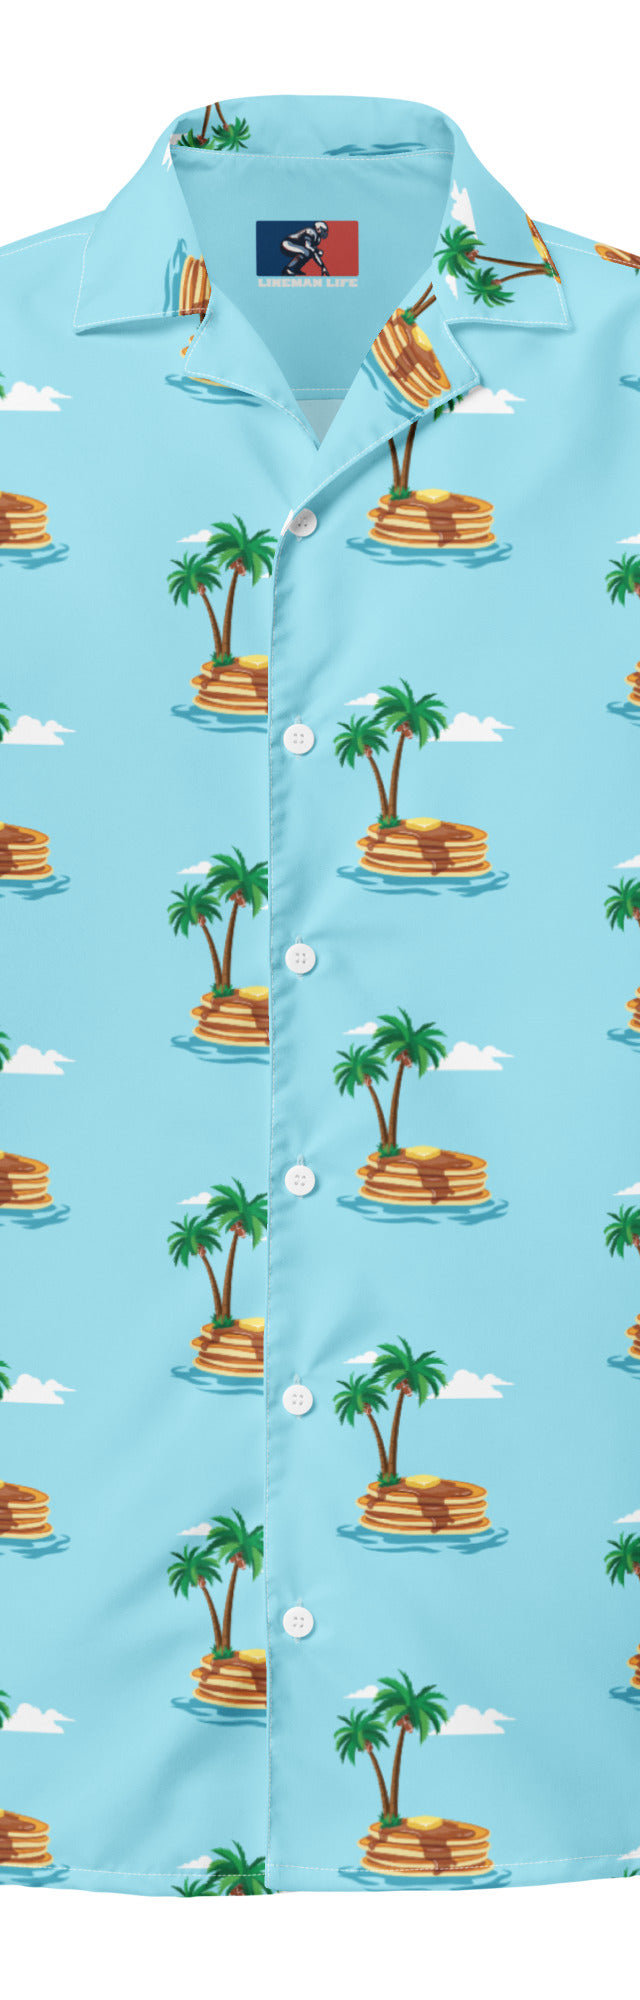 Pancakes and Palm Trees - Blue